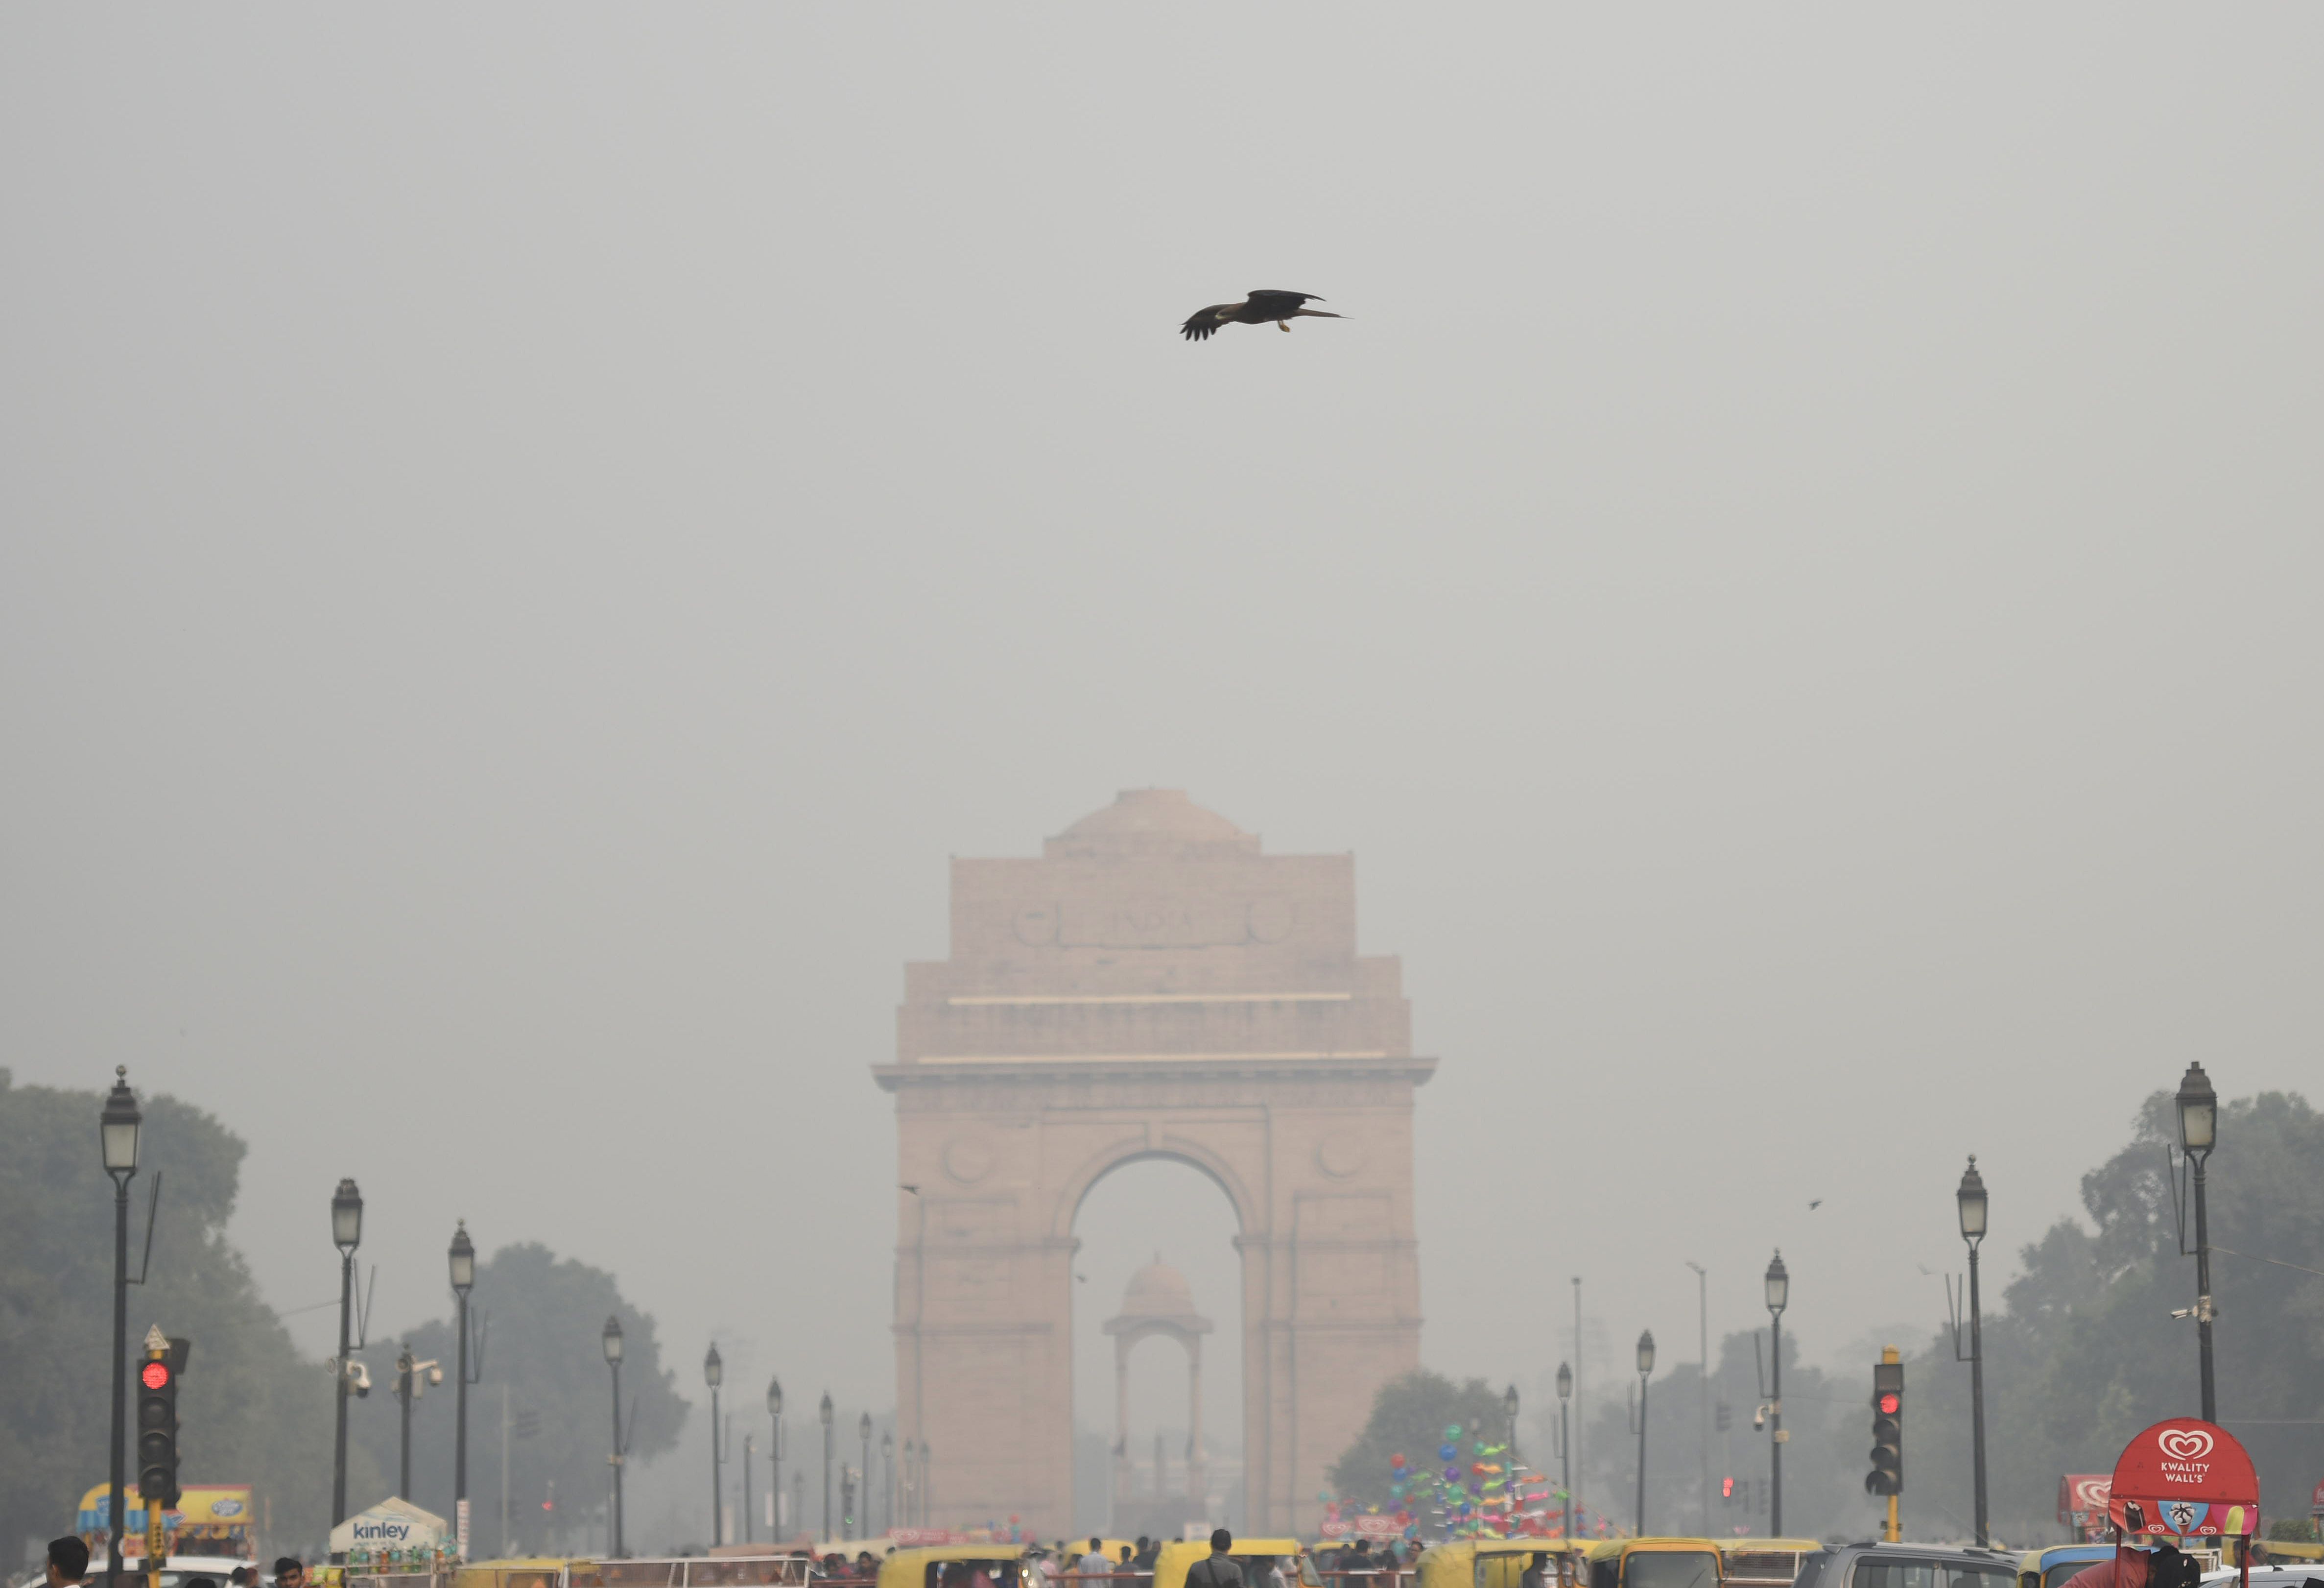 The India Gate surrounded by smog